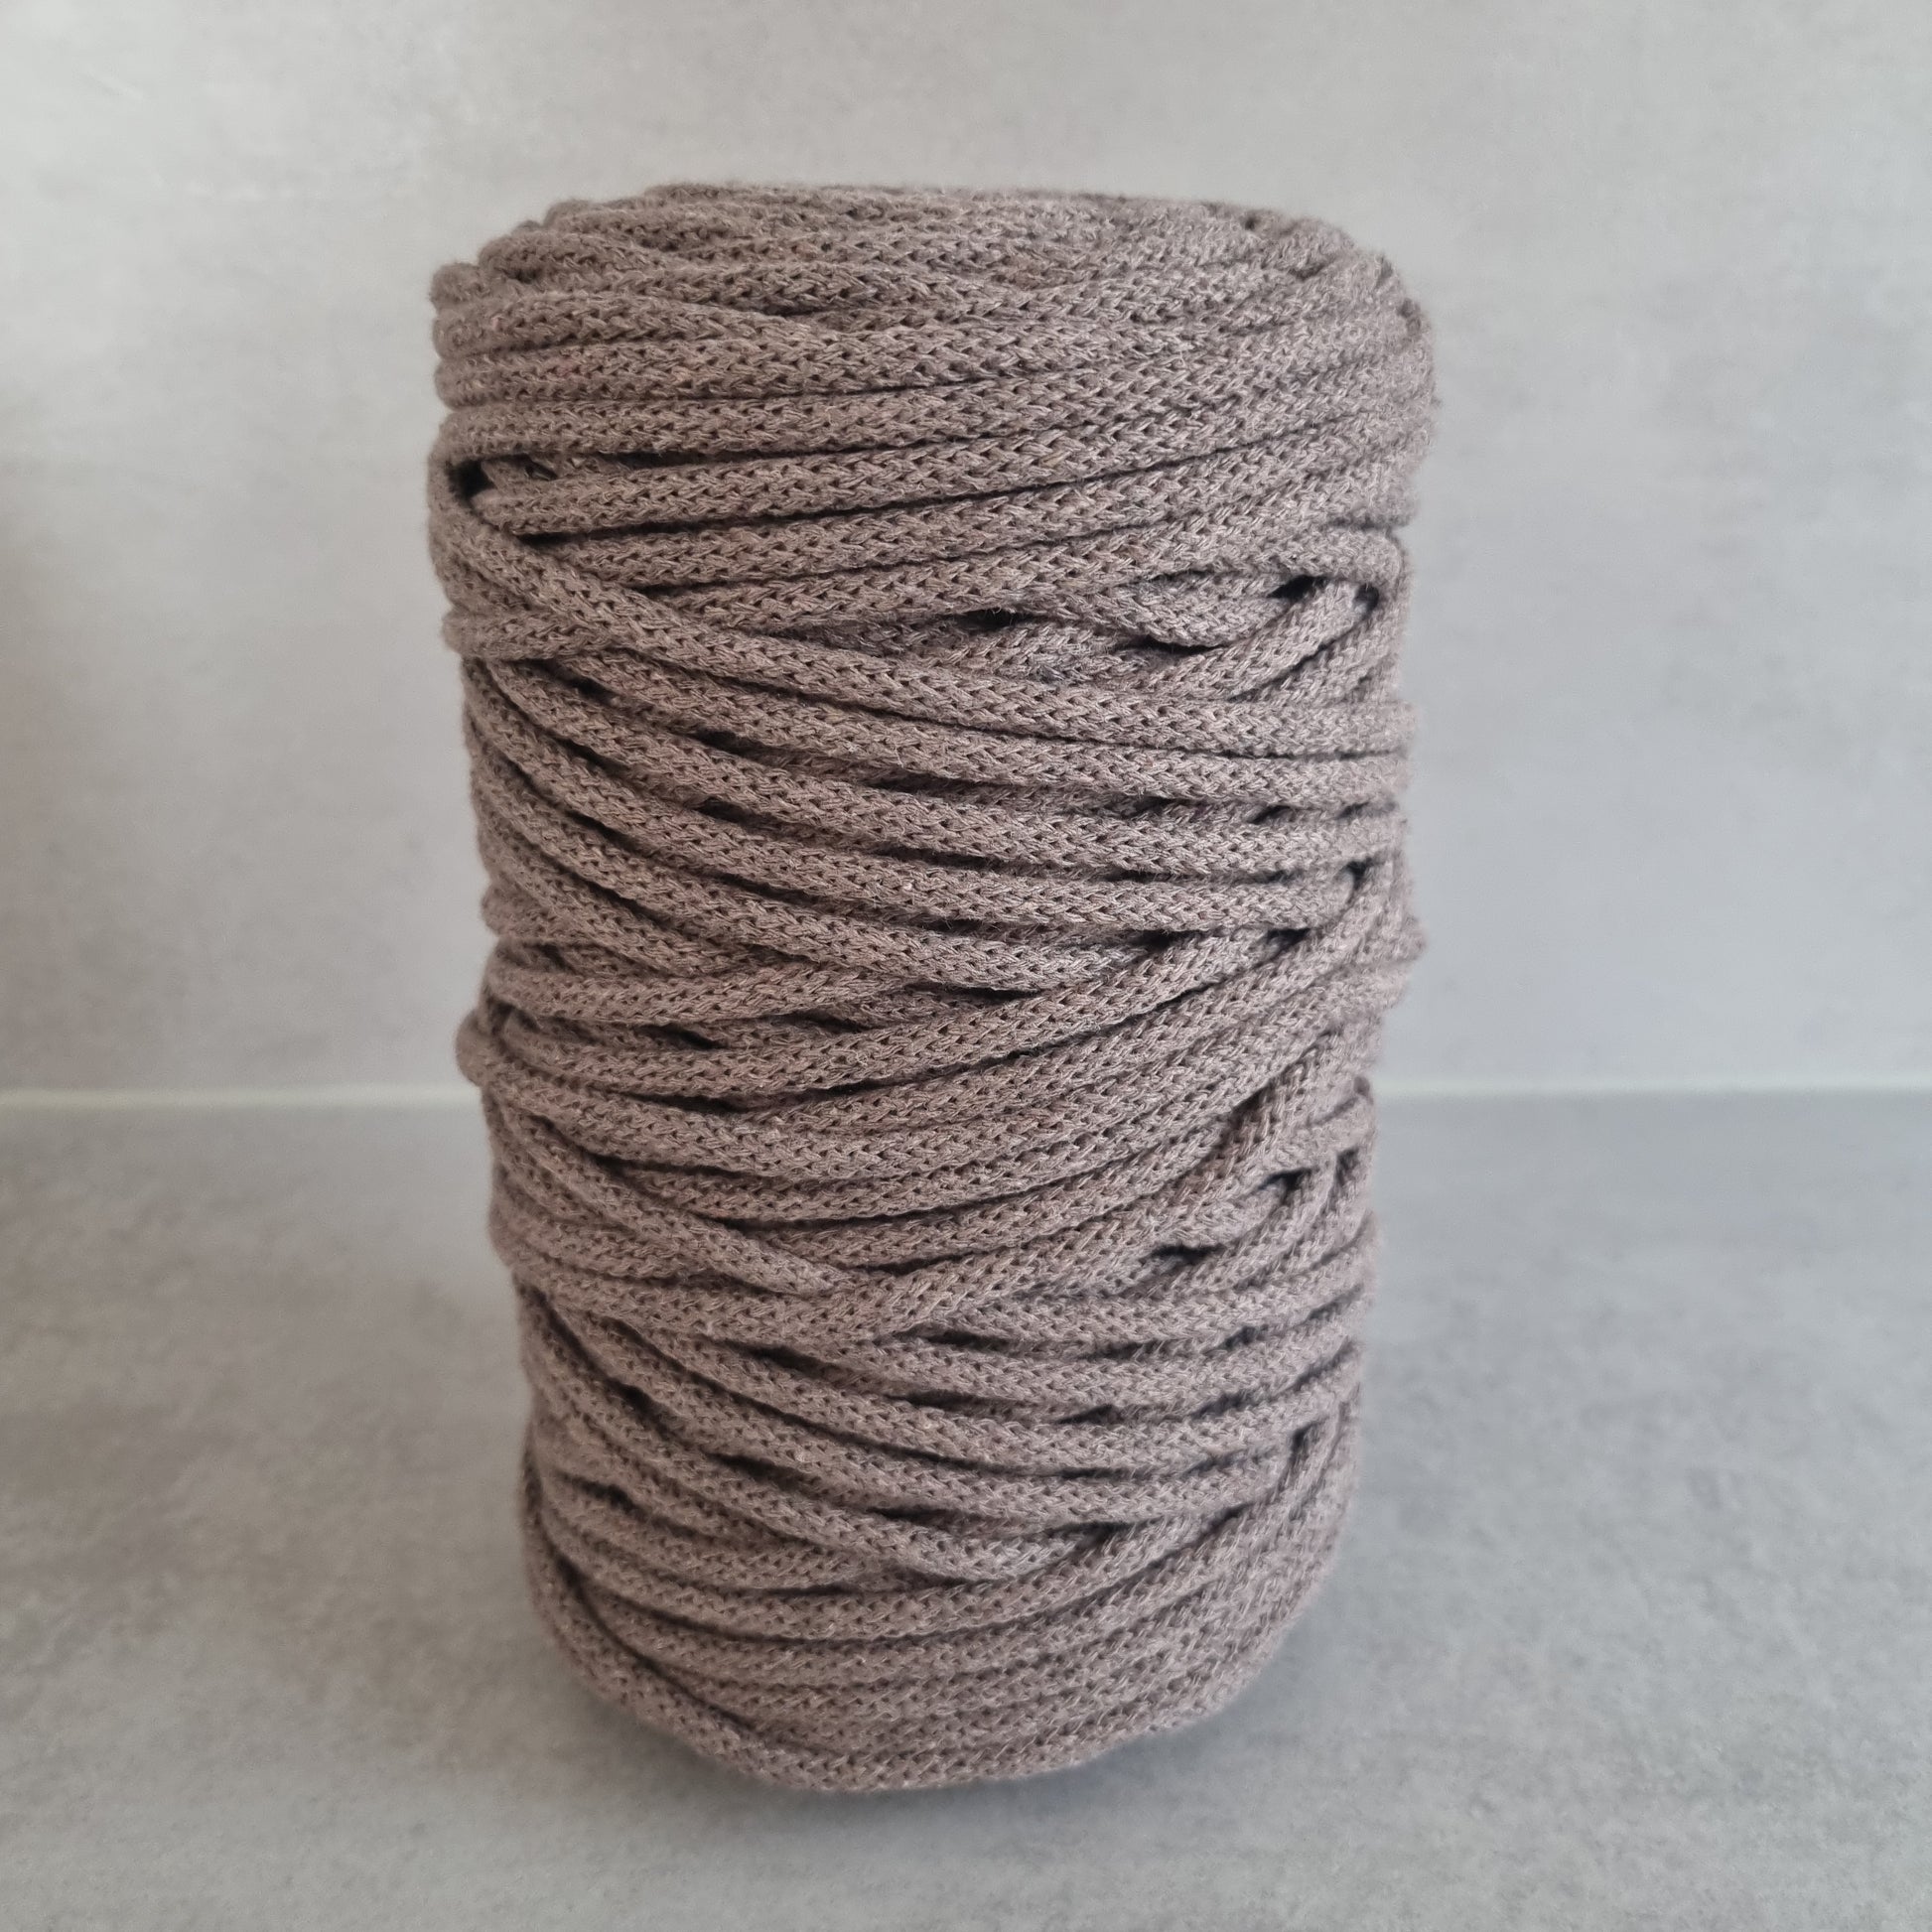  XKDOUS Macrame Cord 6mm x 75Yards, Natural Cotton